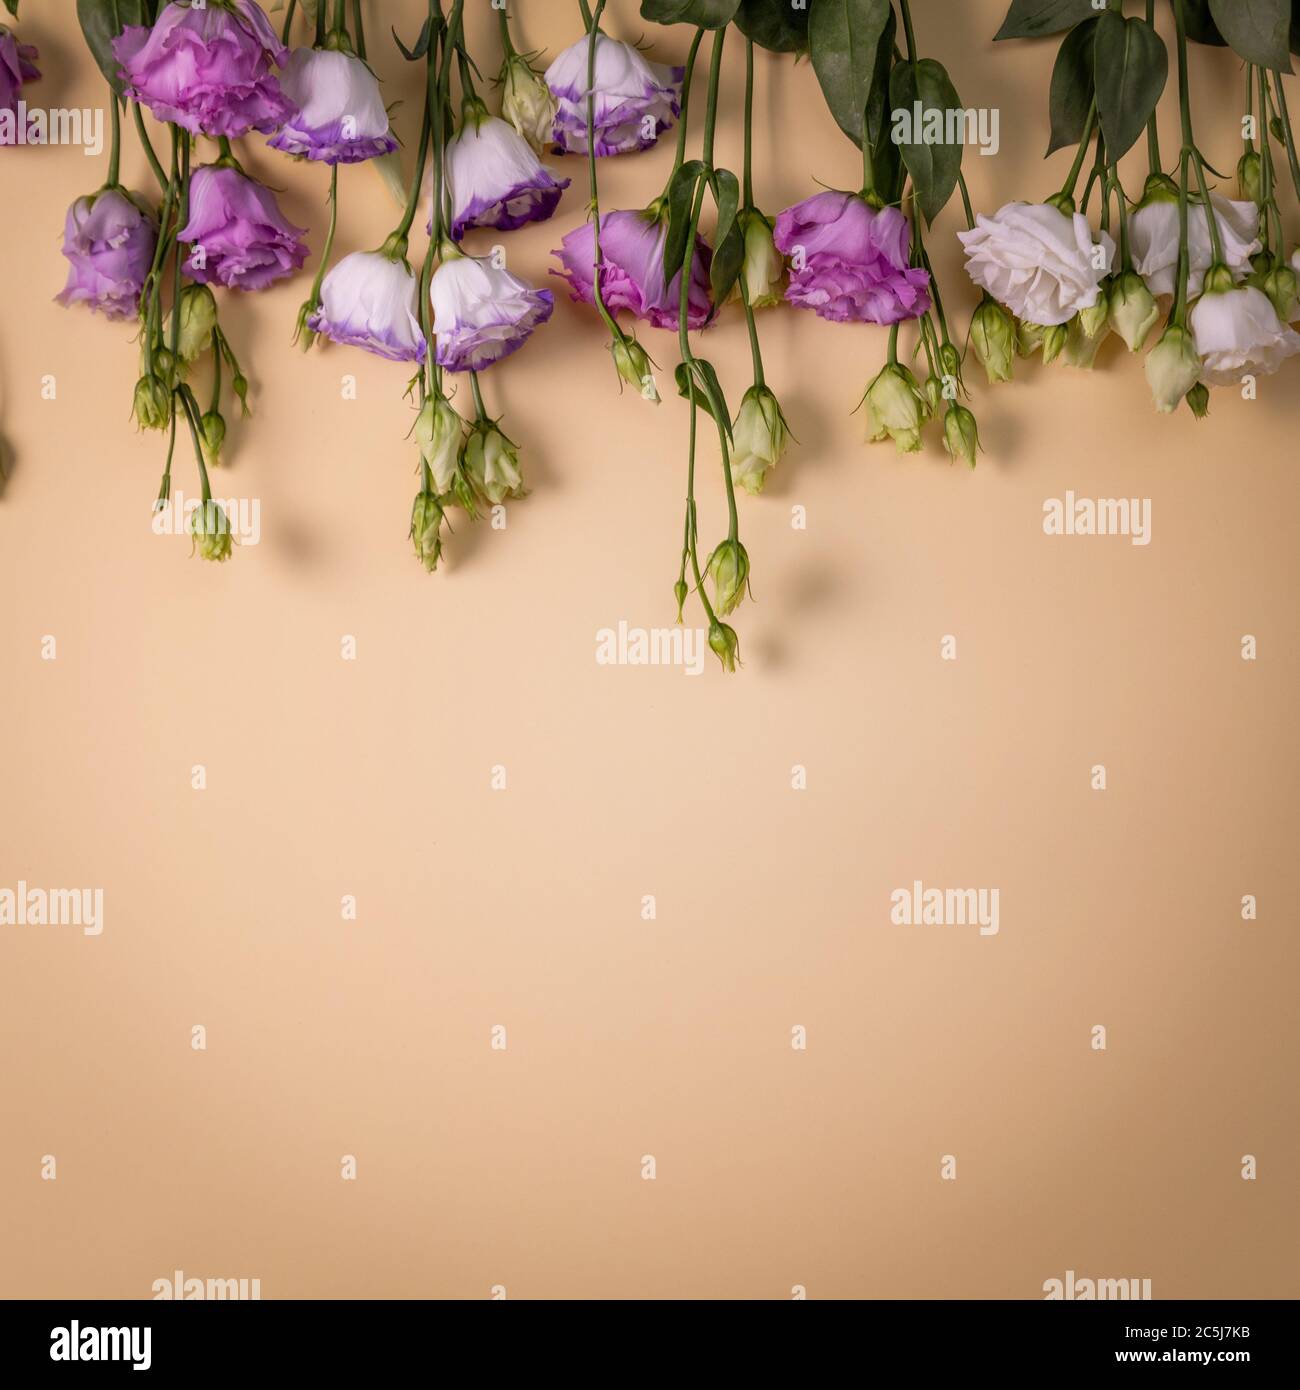 lisianthus flowers on beige pastel background with copy space Stock Photo